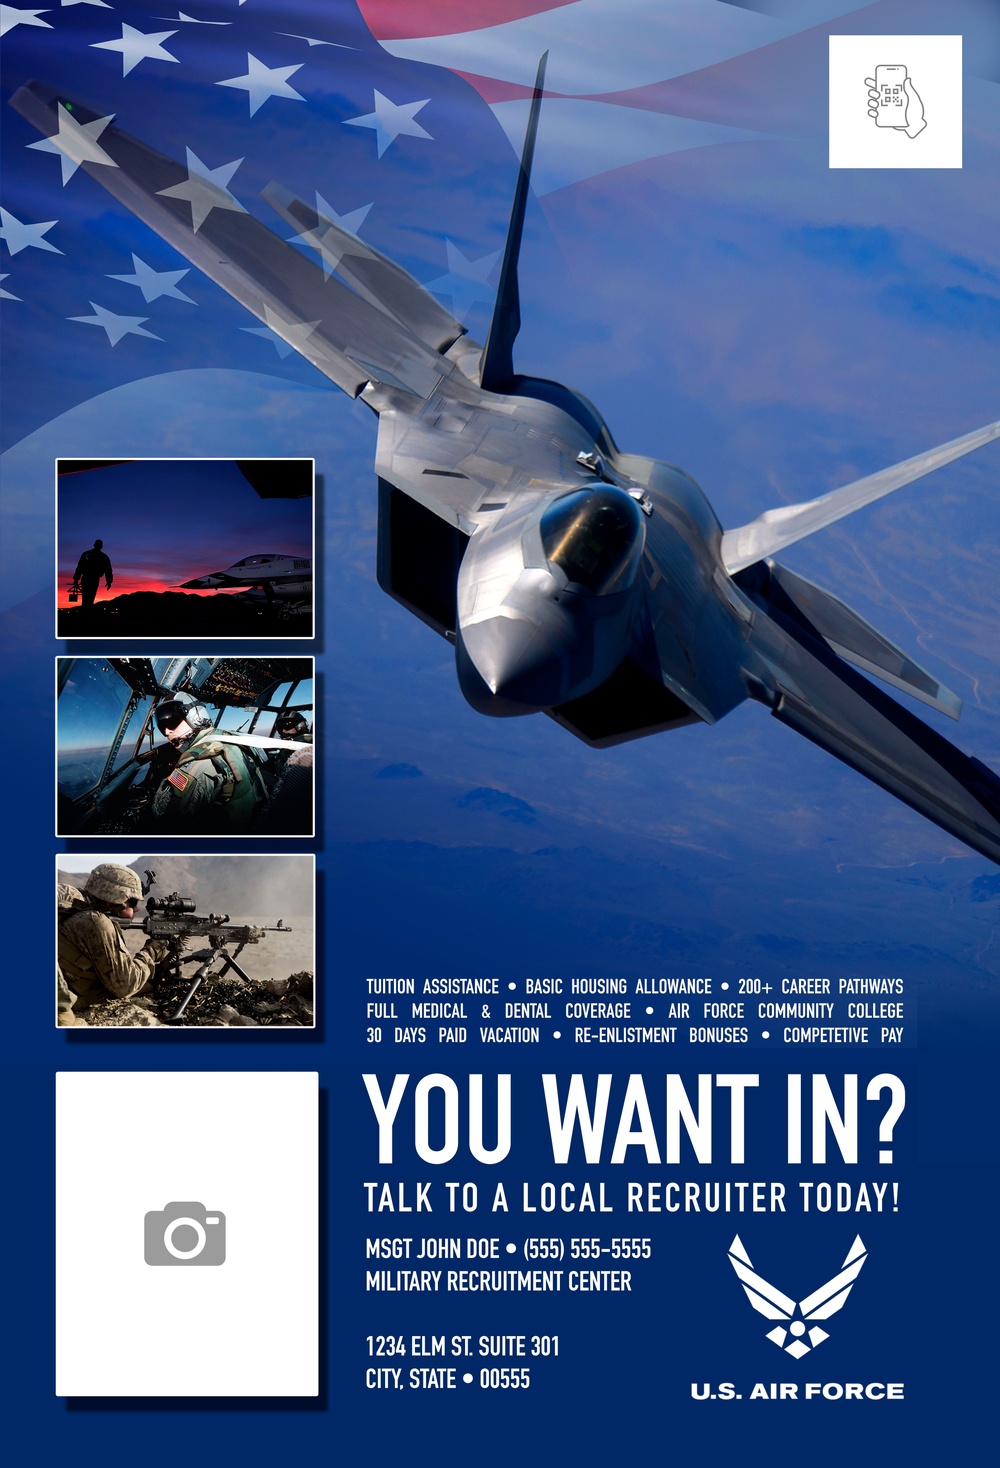 U.S. Air Force Recruiting &amp; Mall Kiosk Poster